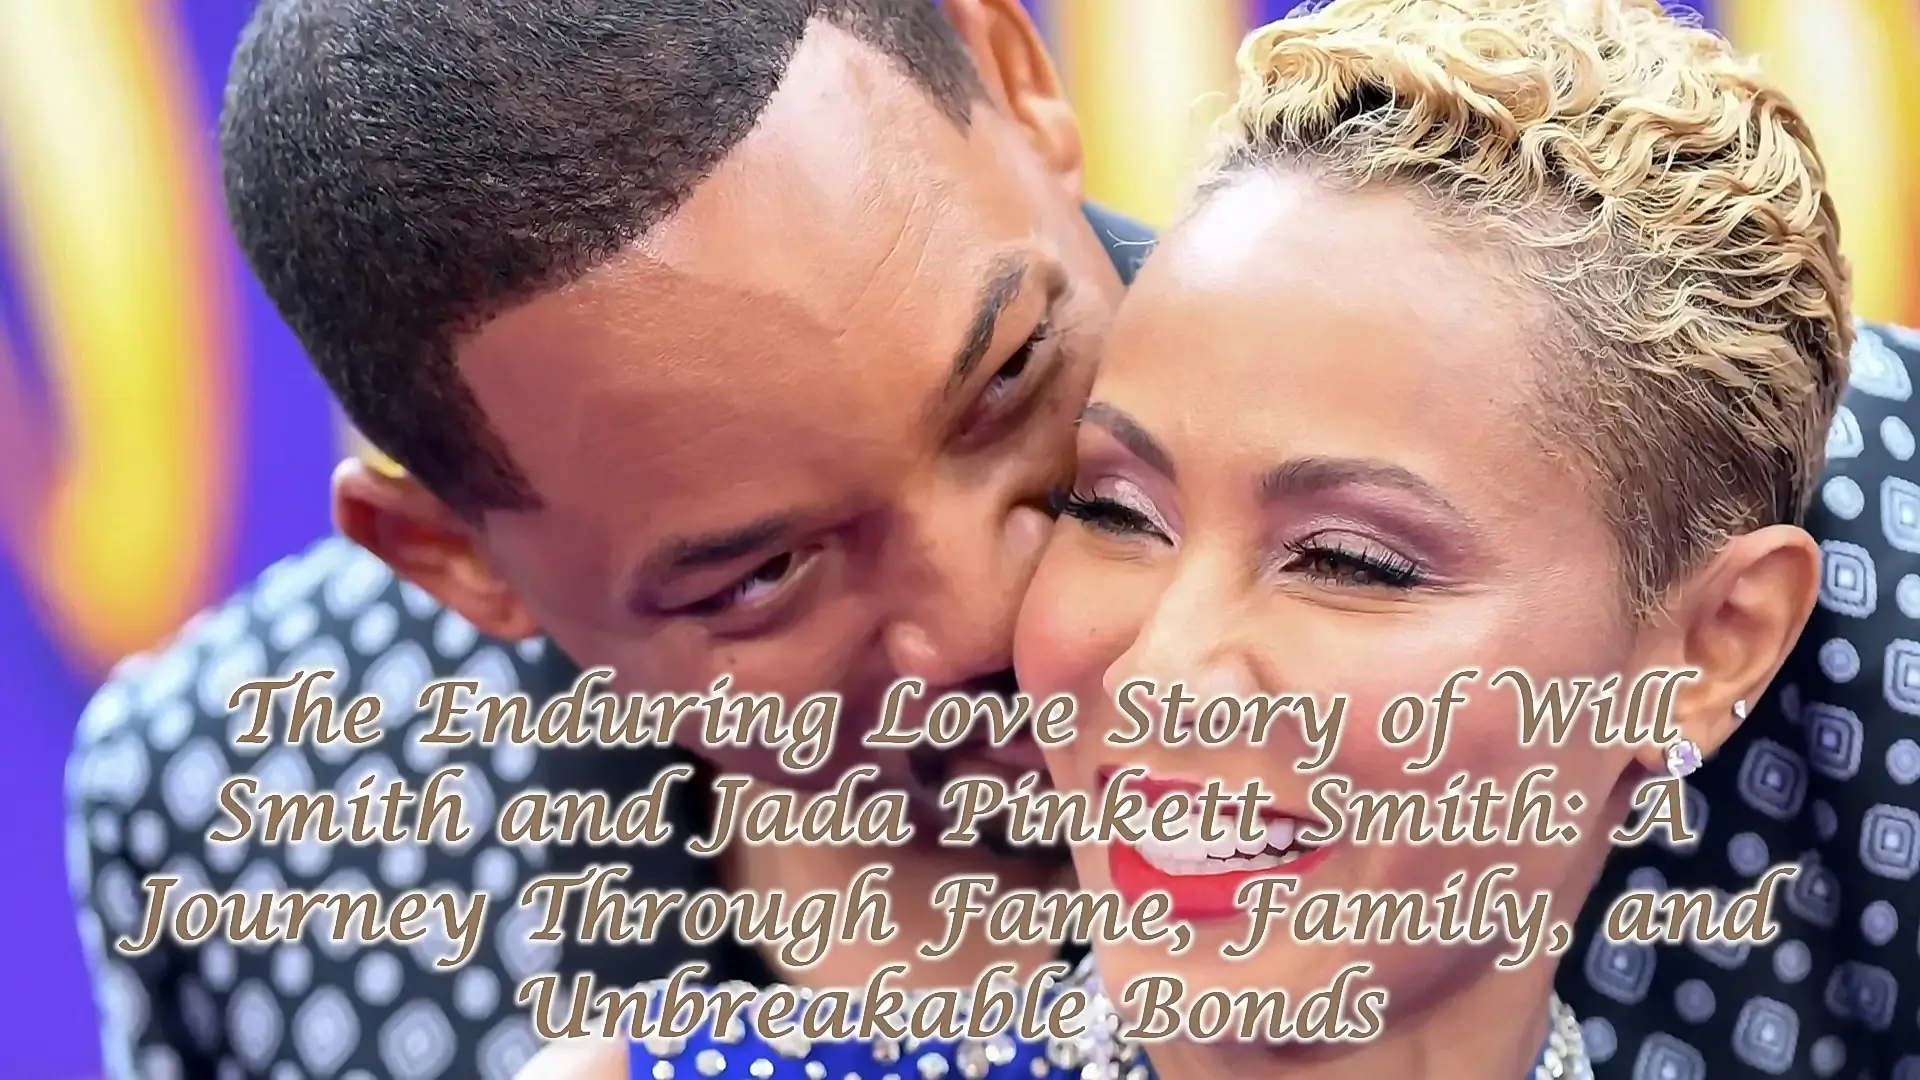 The Enduring Love Story of Will Smith and Jada Pinkett Smith